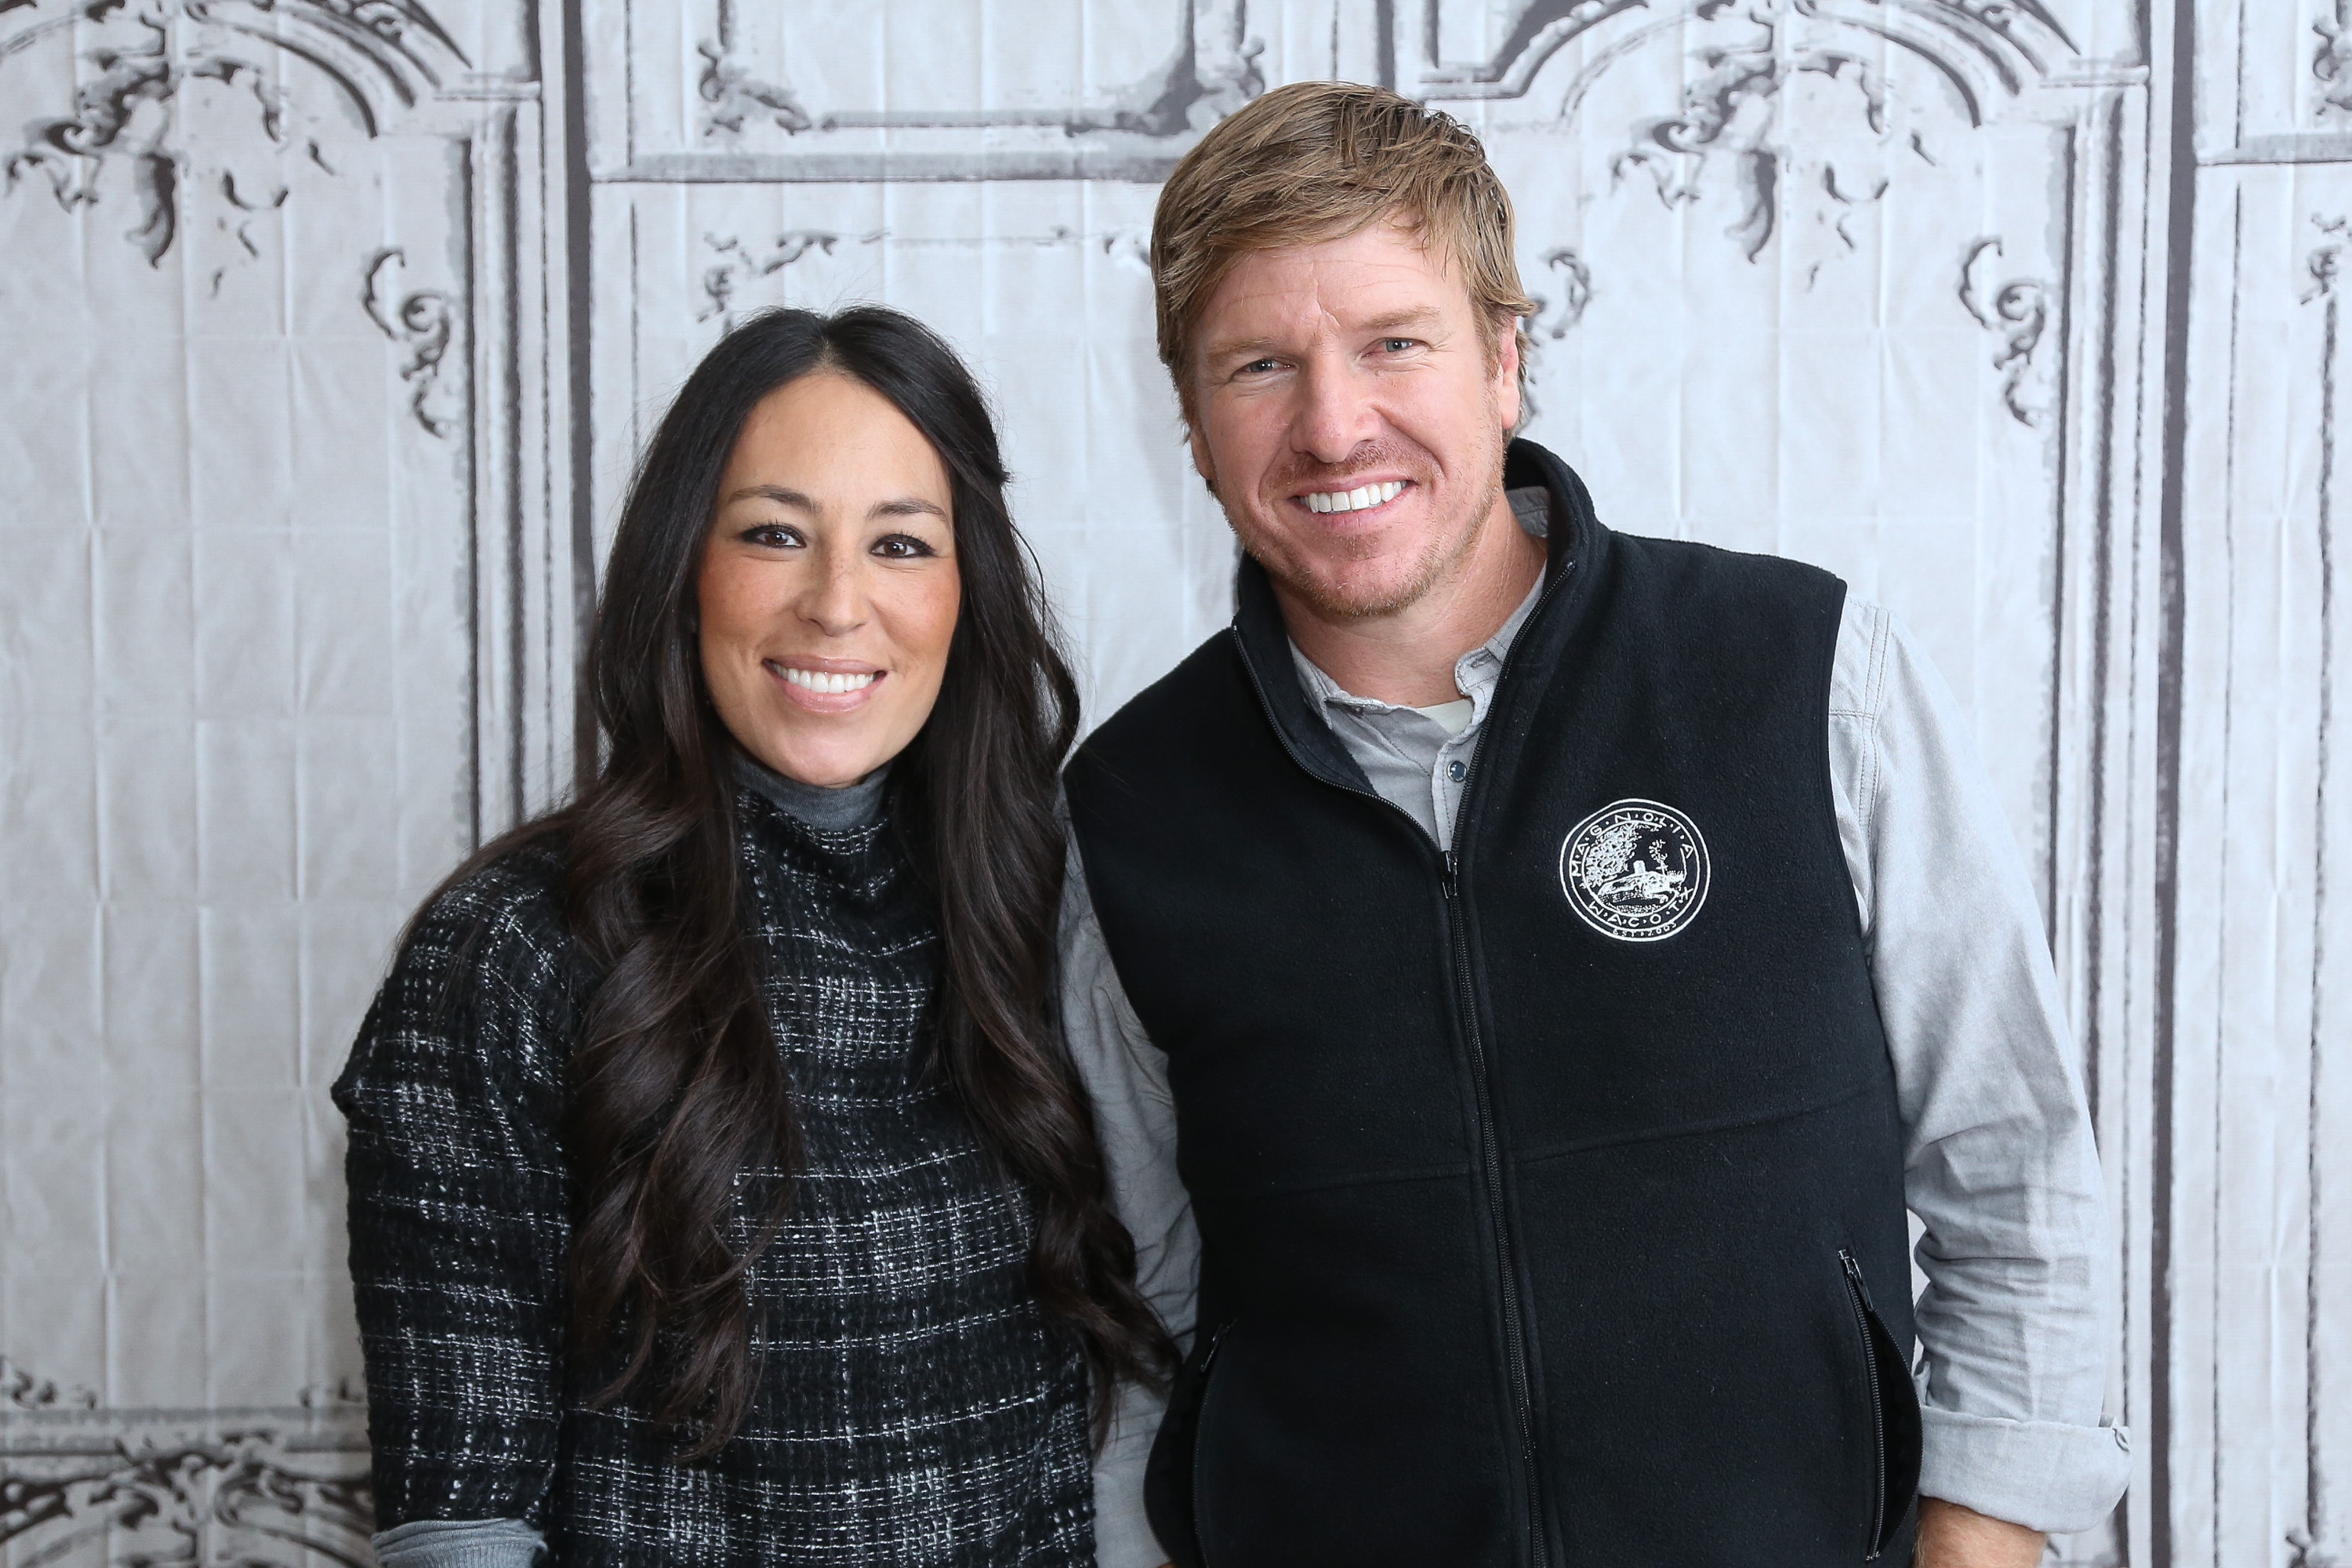 Fixer Upper Is Ending. What Is Chip and Joanna Gaines' Net Worth?